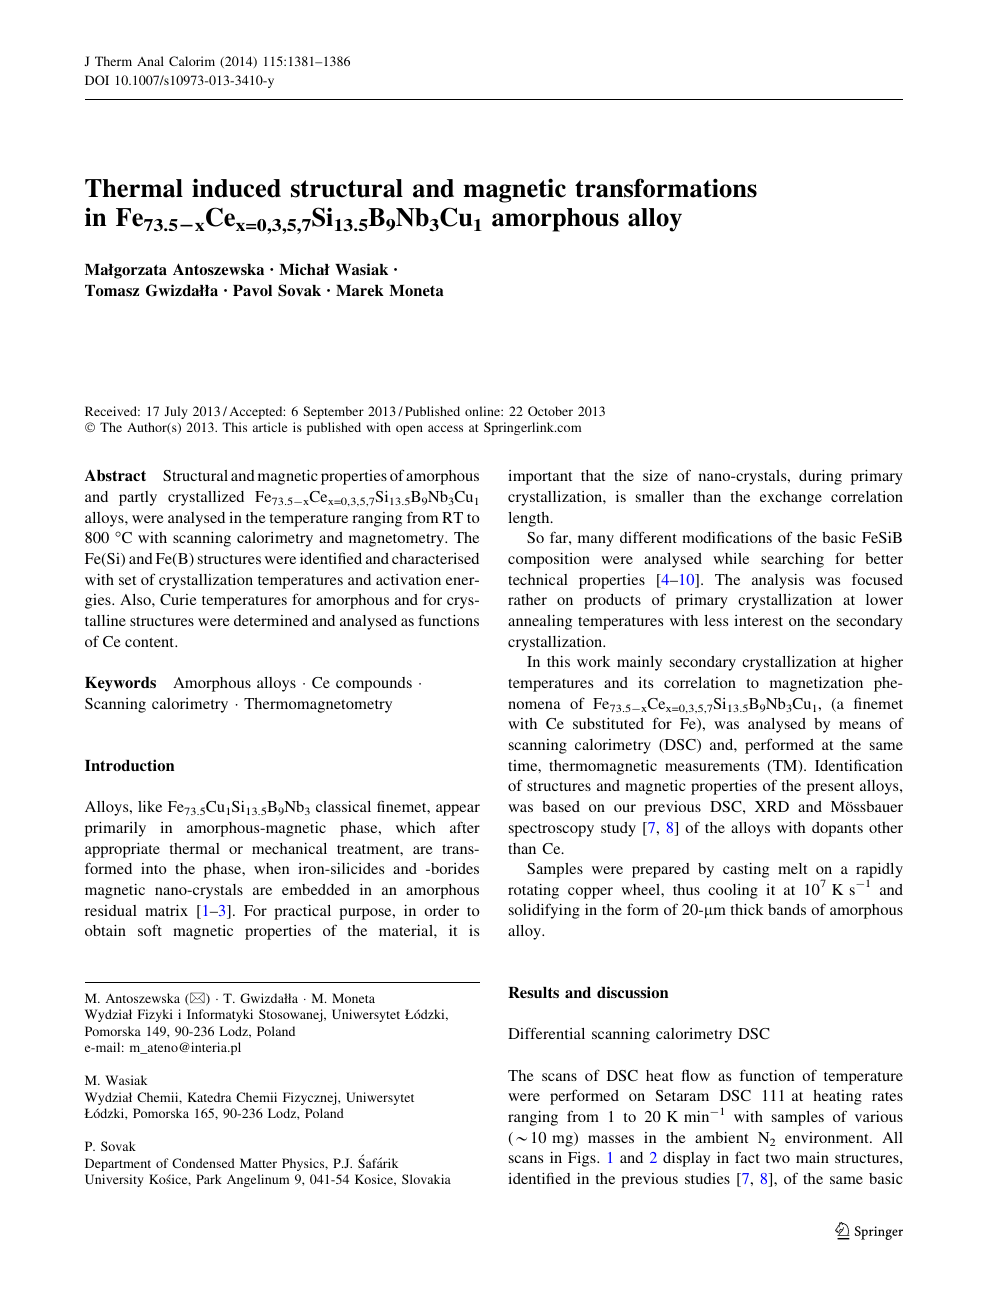 Thermal Induced Structural And Magnetic Transformations In Fe73 5 Xcex 0 3 5 7si13 5b9nb3cu1 Amorphous Alloy Topic Of Research Paper In Nano Technology Download Scholarly Article Pdf And Read For Free On Cyberleninka Open Science Hub